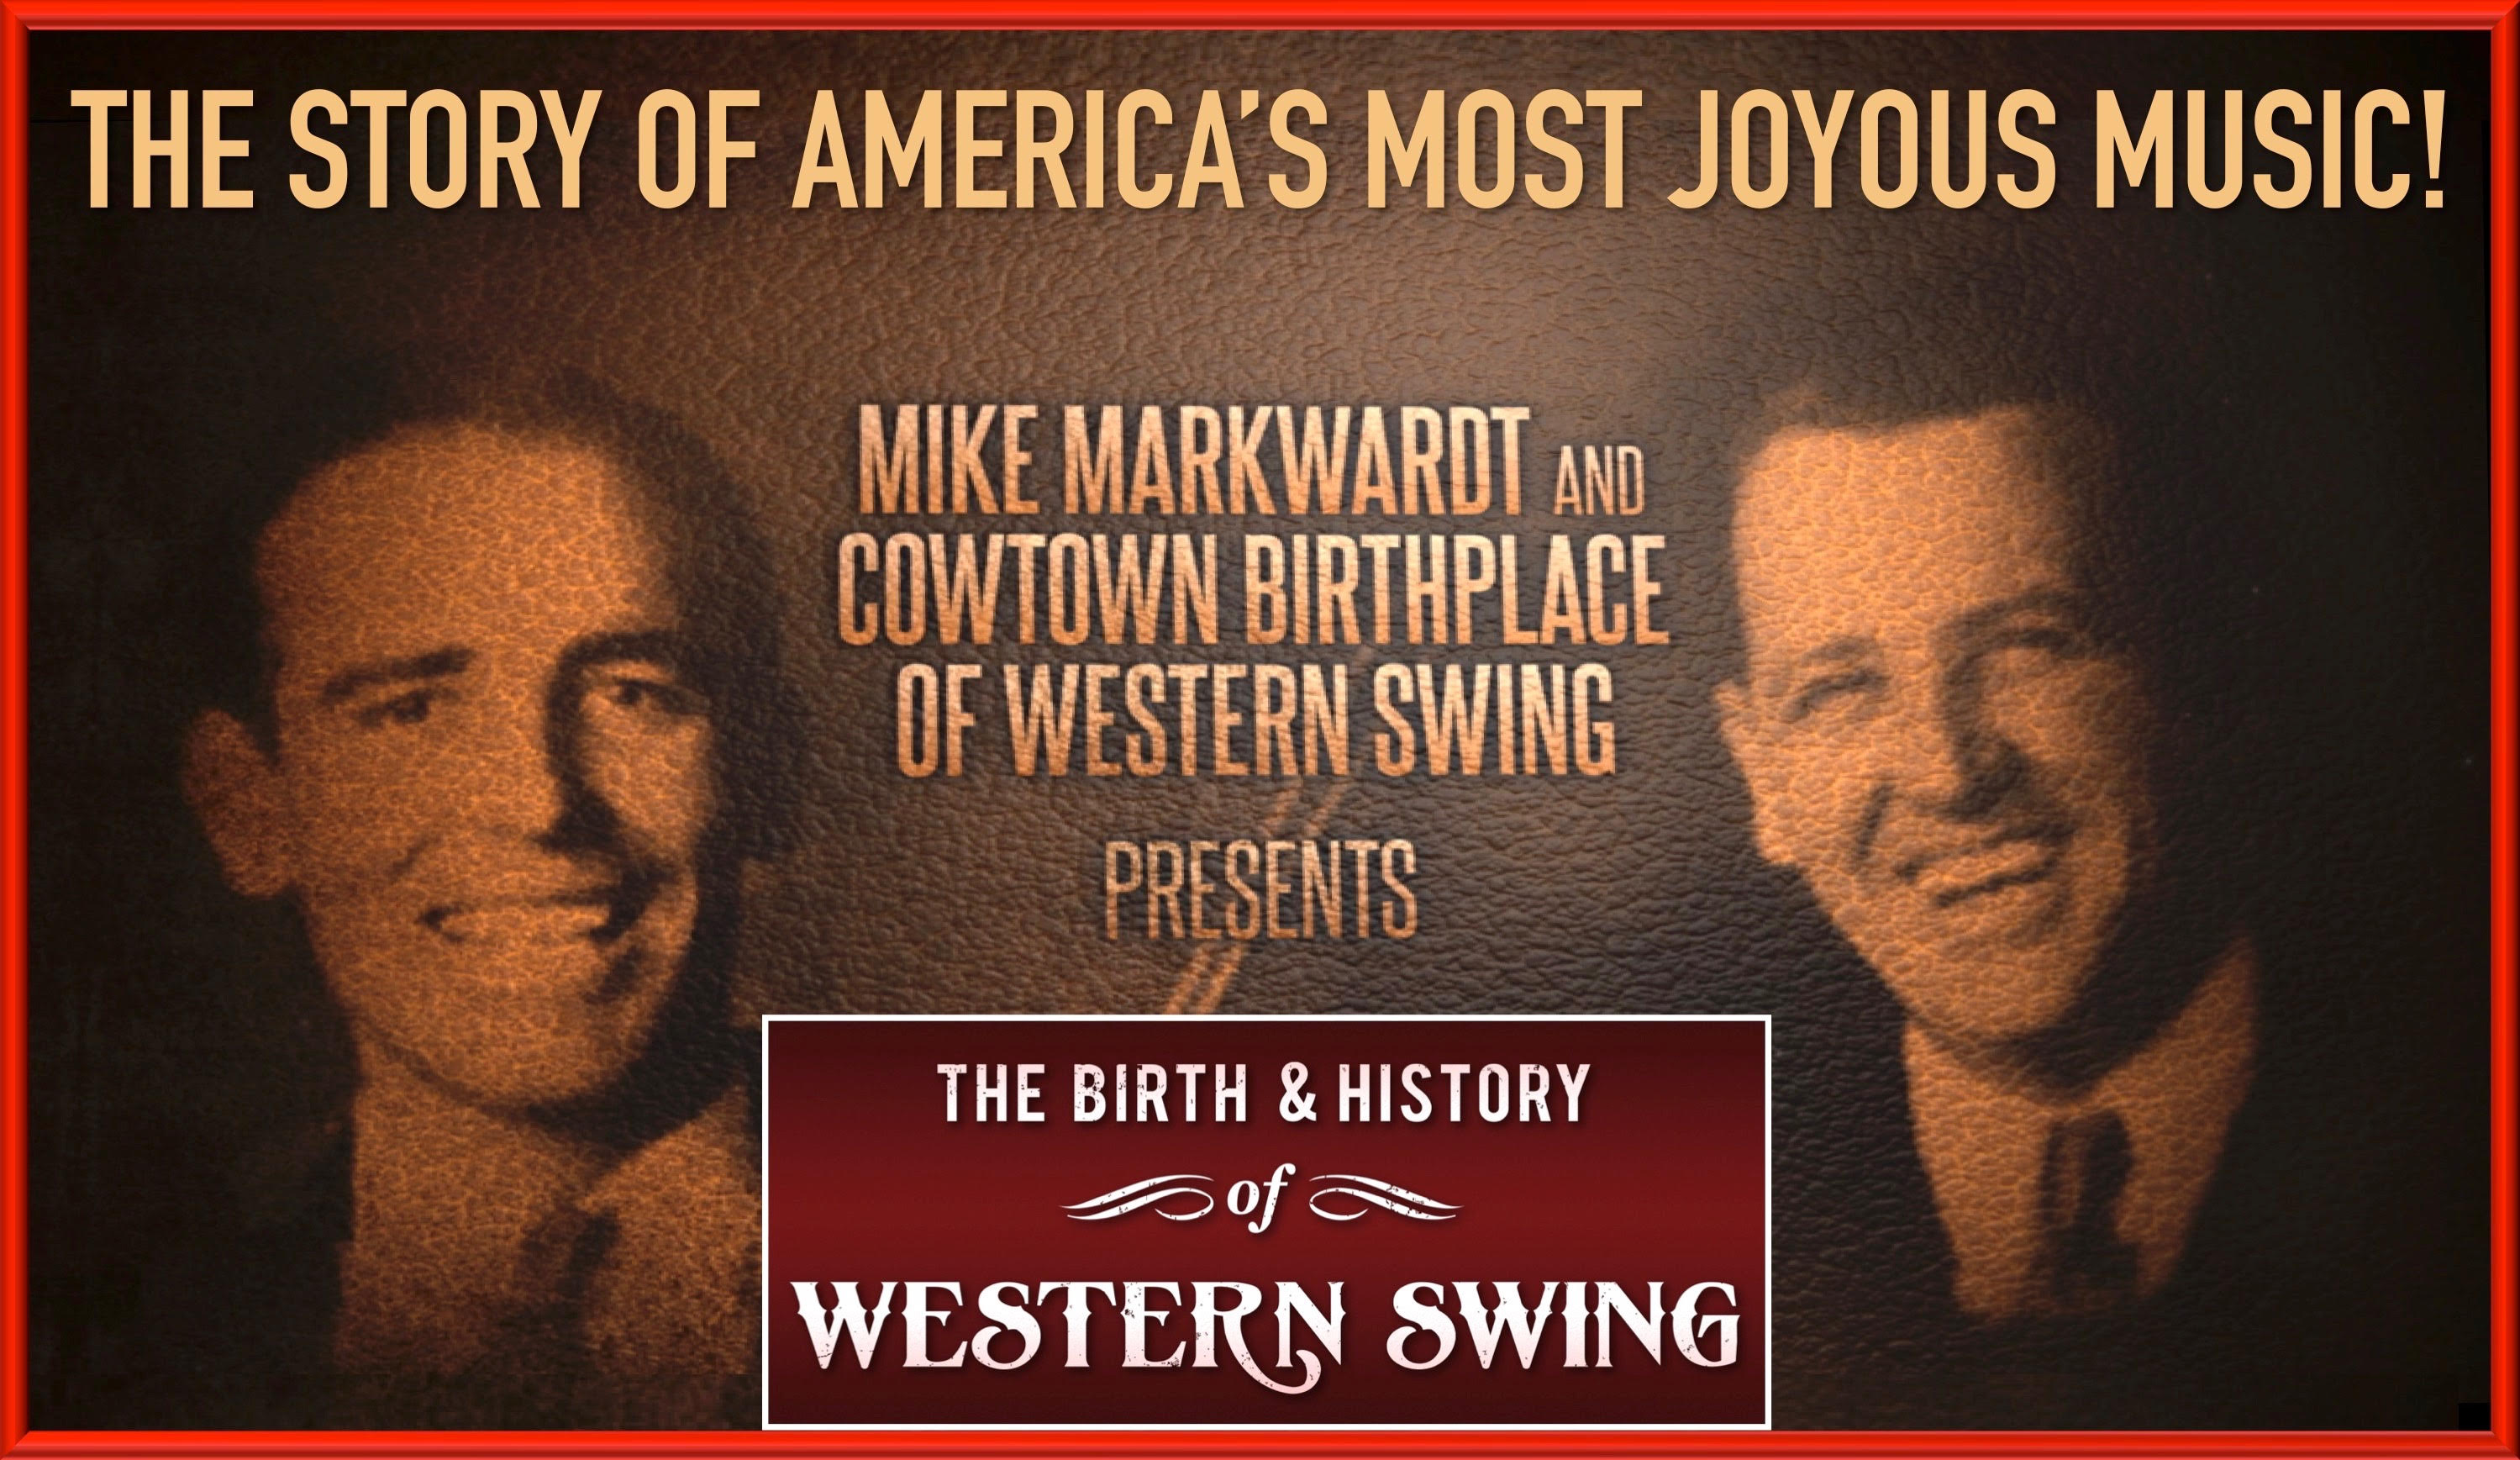 The Birth & History of Western Swing